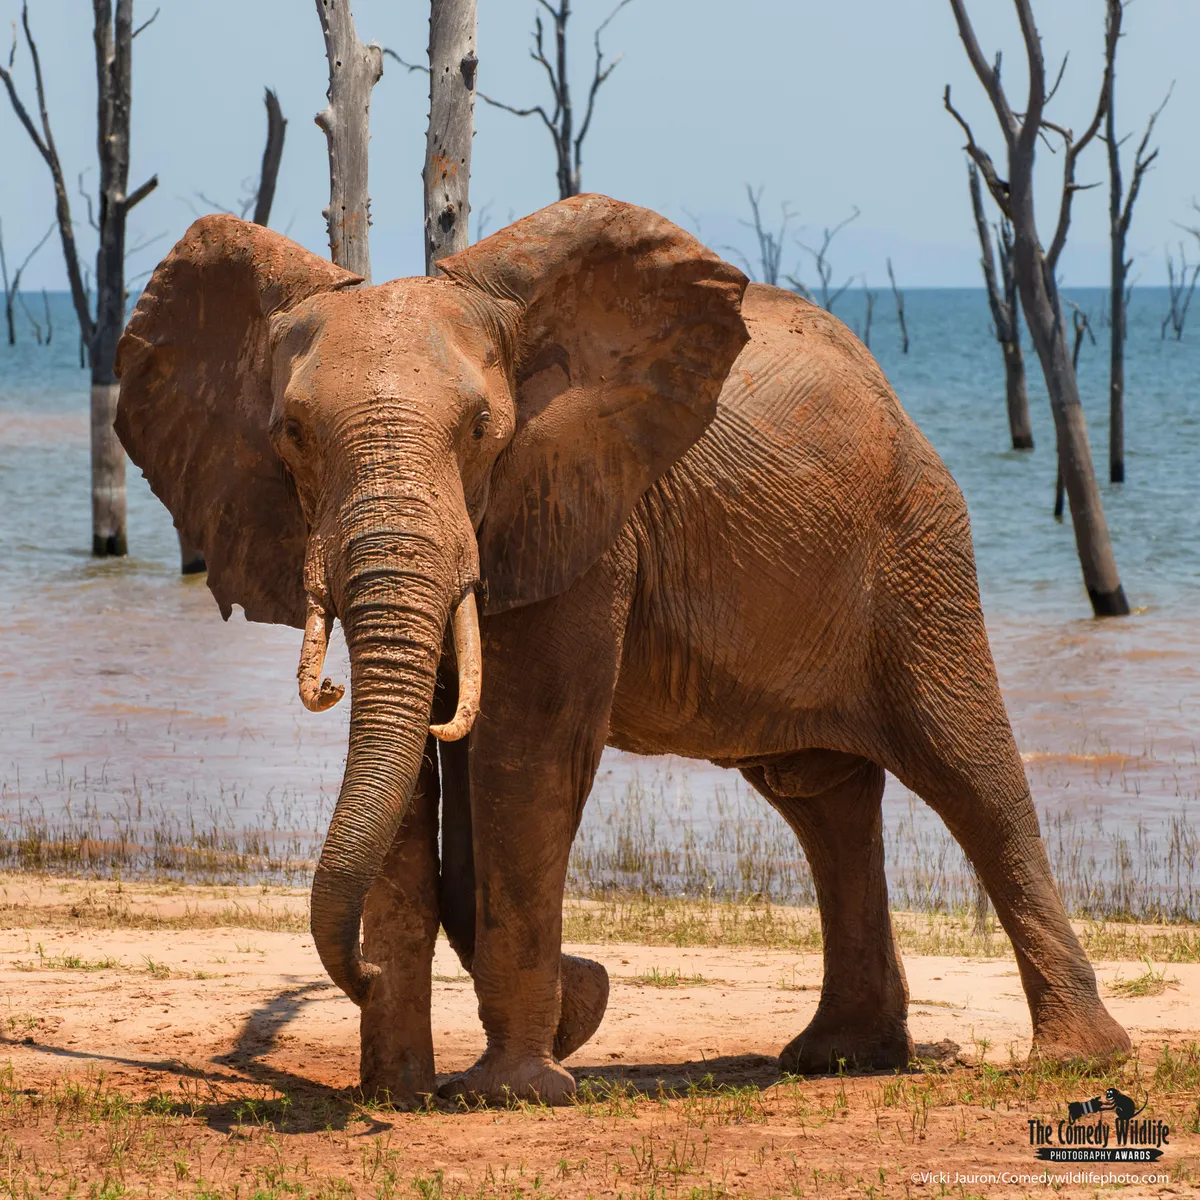 In front of a blue lake (with dead trees sticking up out of it), a young elephant takes a mud bath, standing on all four legs looking towards the camera.